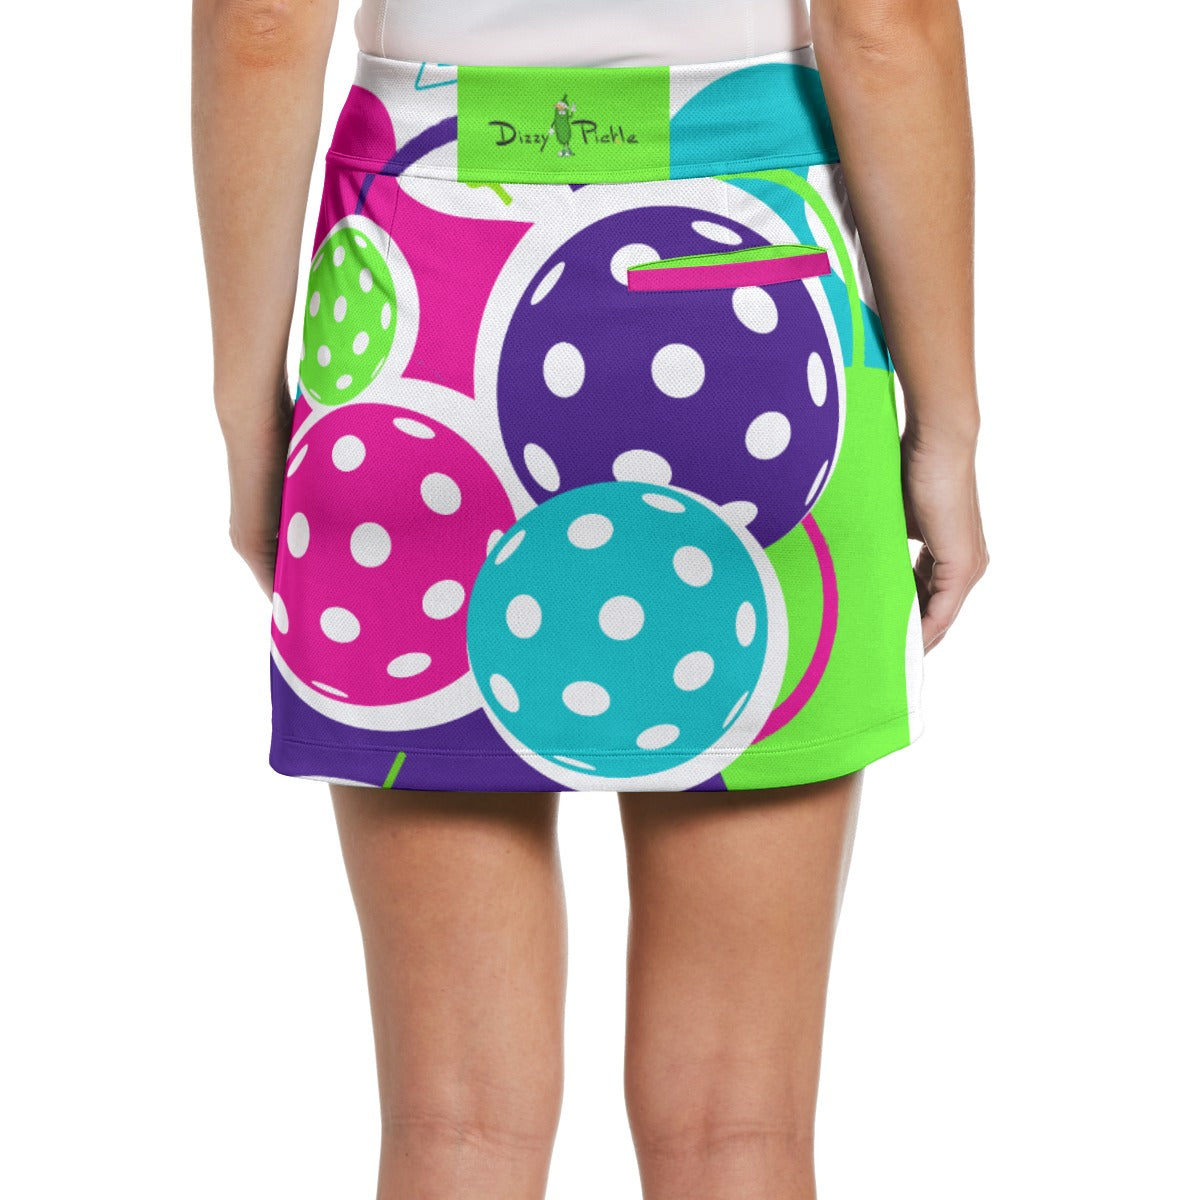 Dizzy Pickle Diana - 17" Performance Skort with Inner Shorts